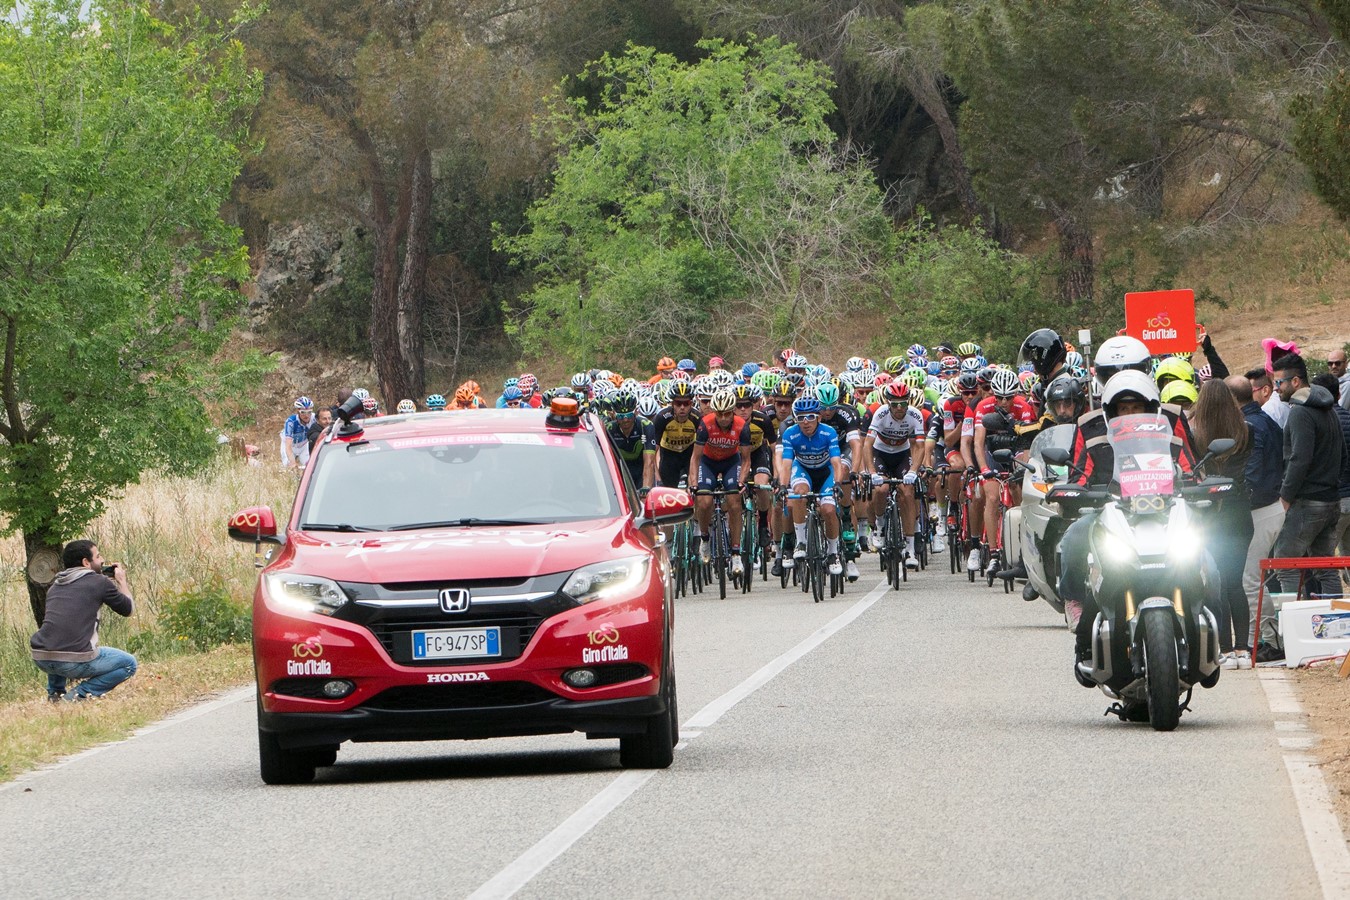 Honda features as official sponsor and supplier of cars and motorcycles for the 100th Giro d'Italia